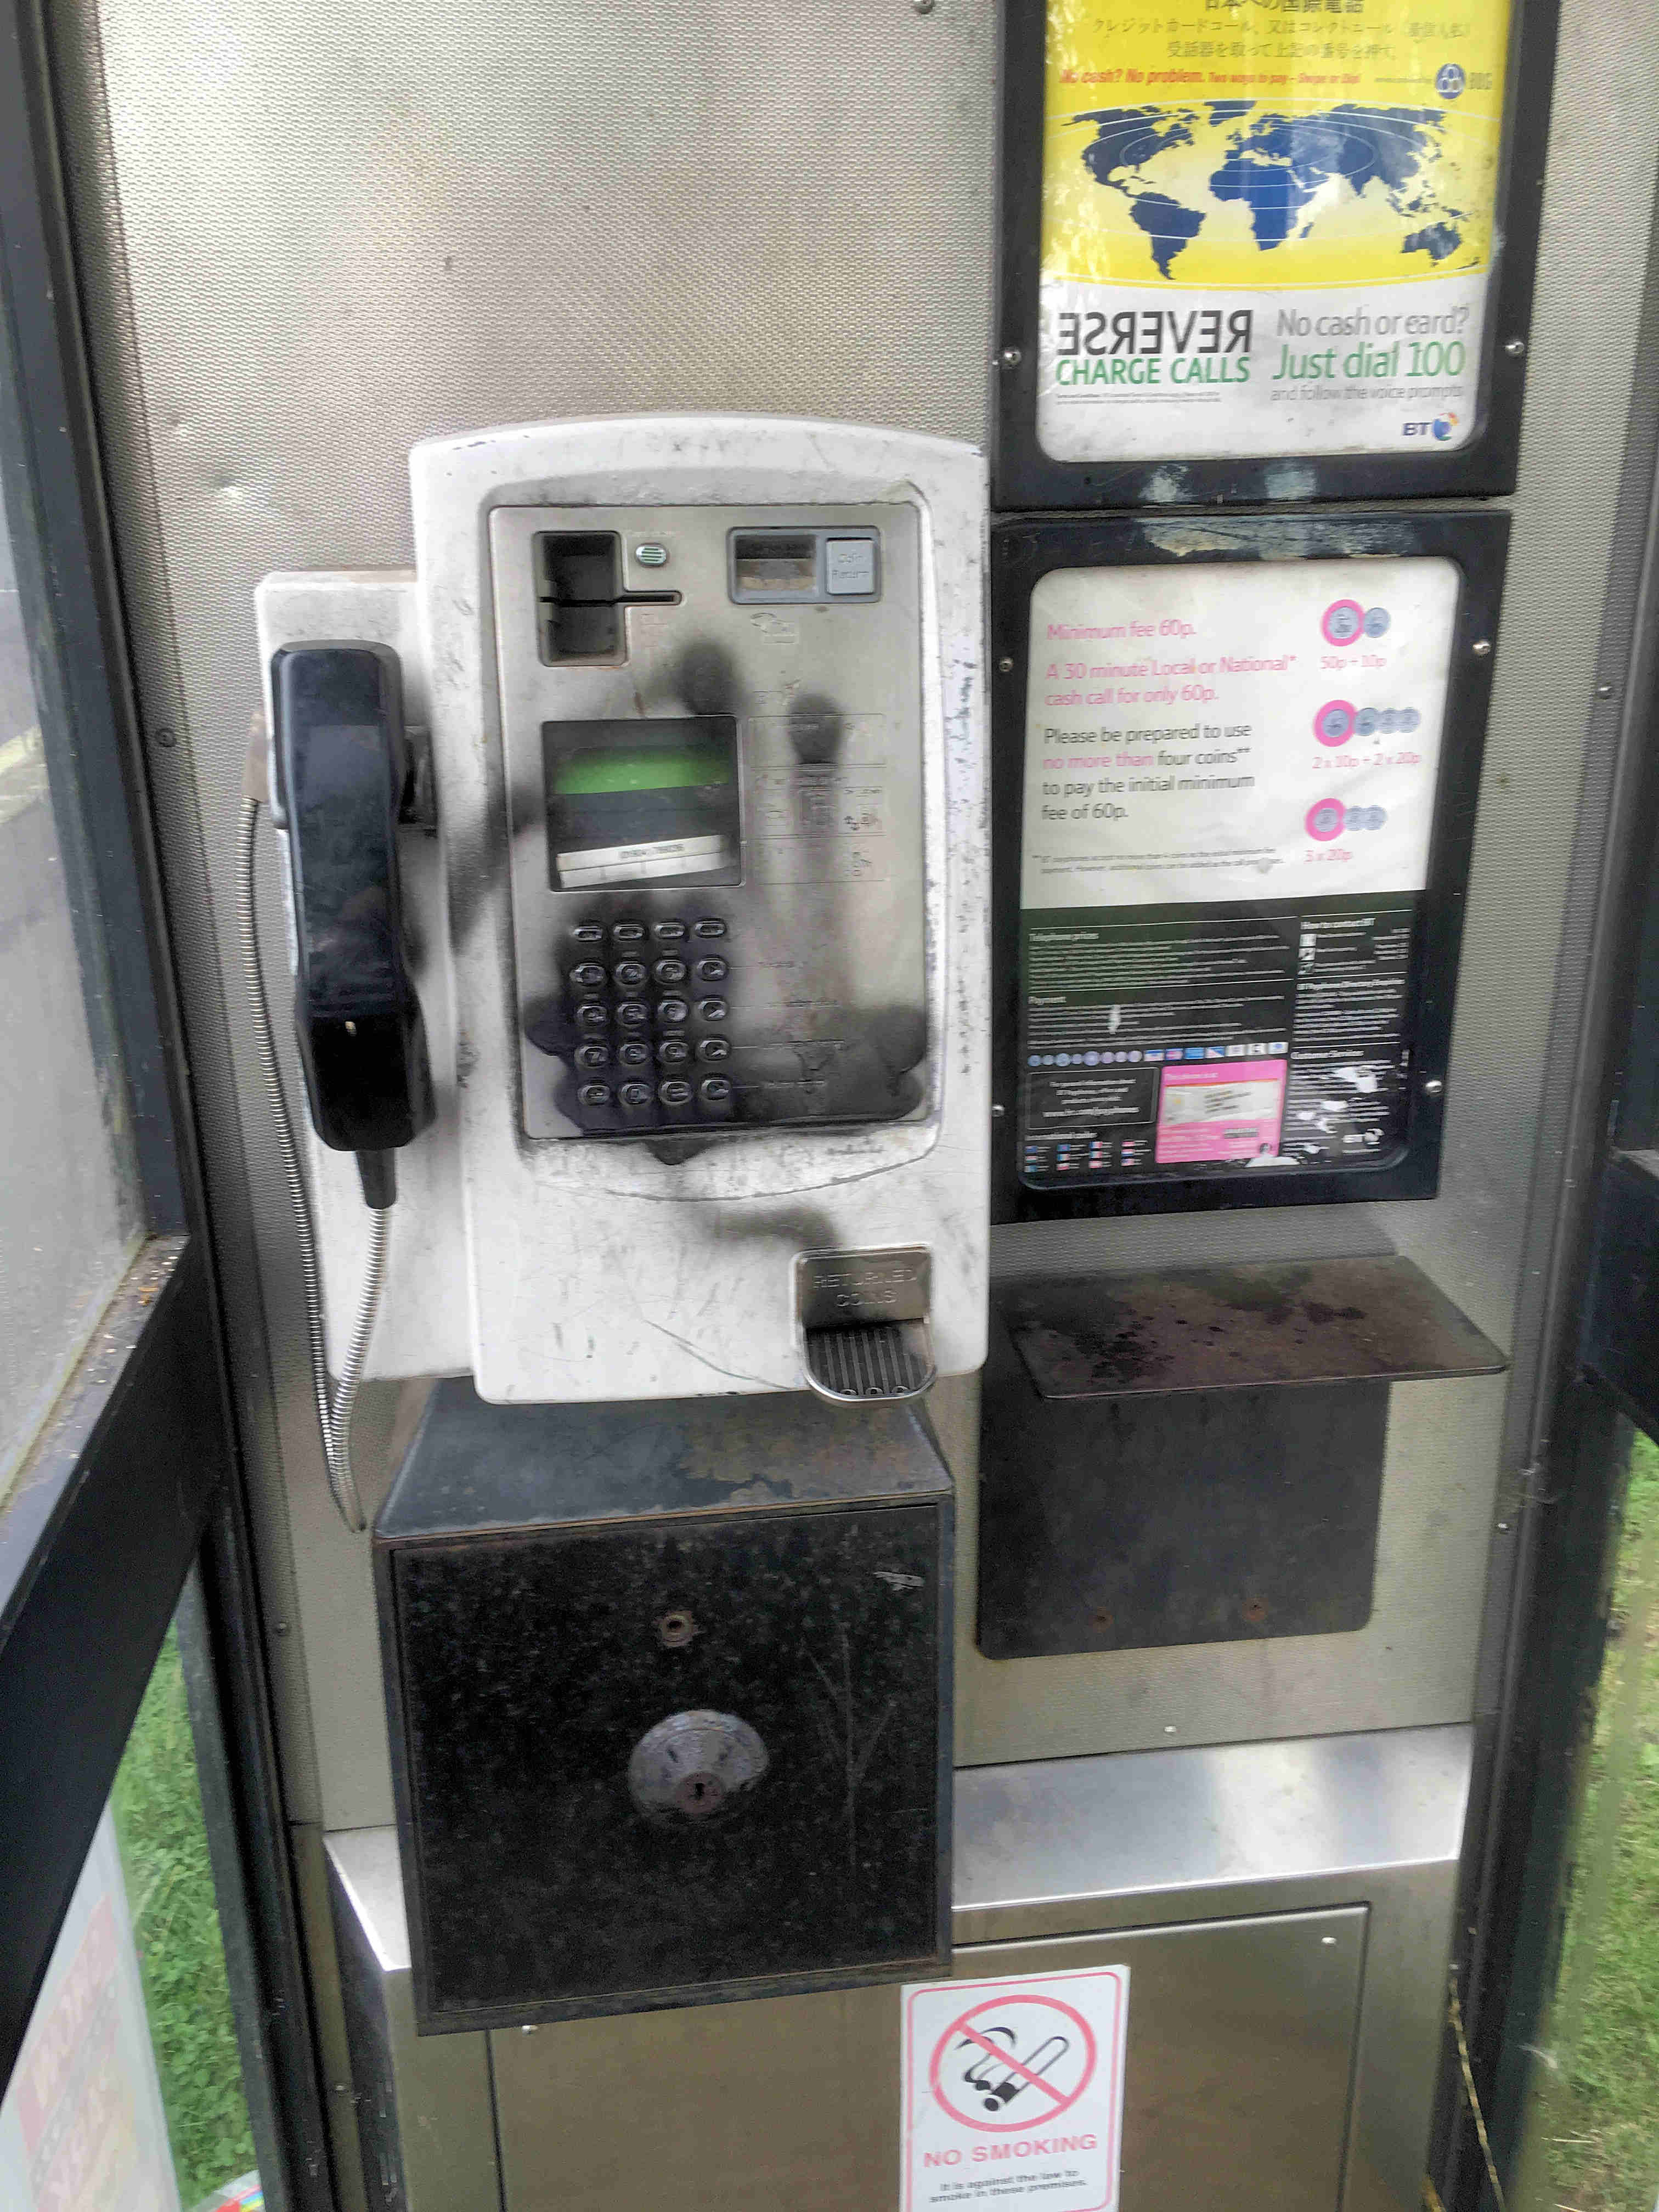 The payphone kiosk in Cornlands Road is in poor condition. No sign of cleaning or maintenance by BT